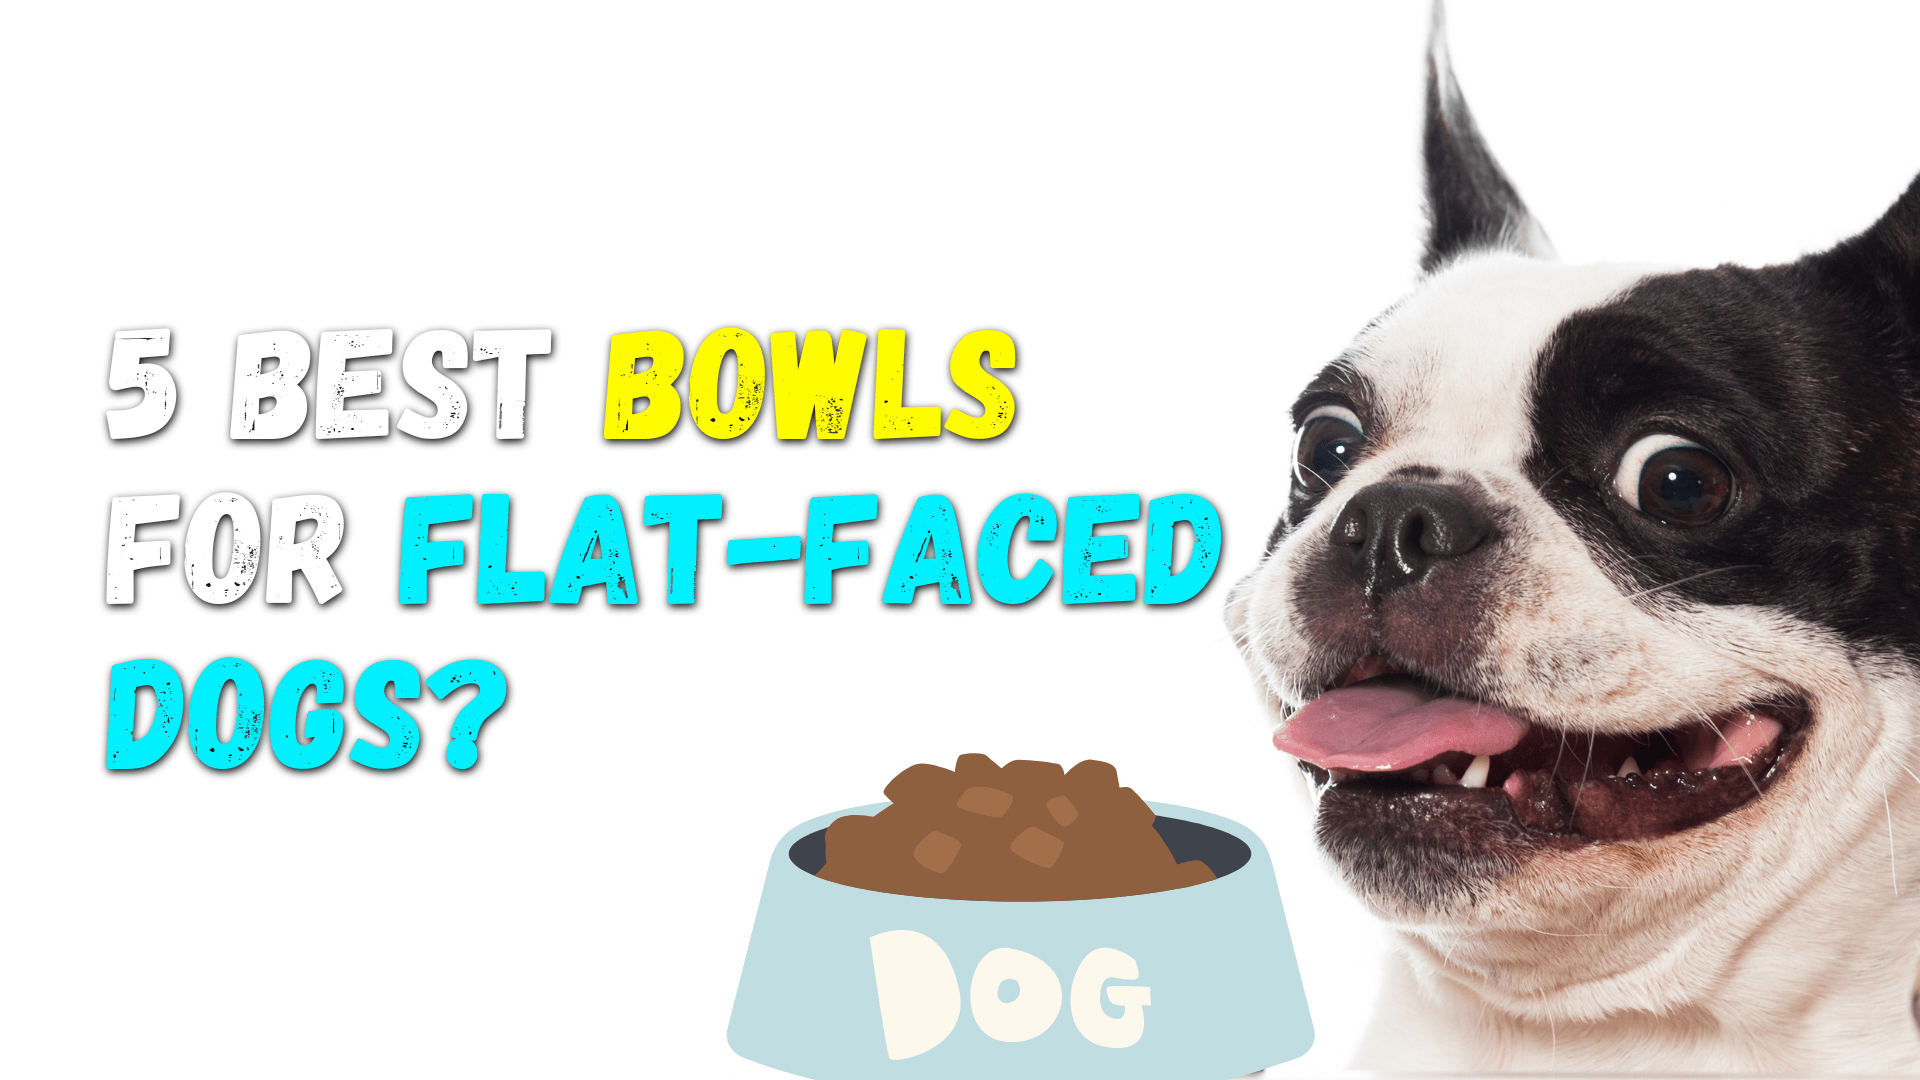 5 Best Dog Bowls For Flat-Faced Dogs